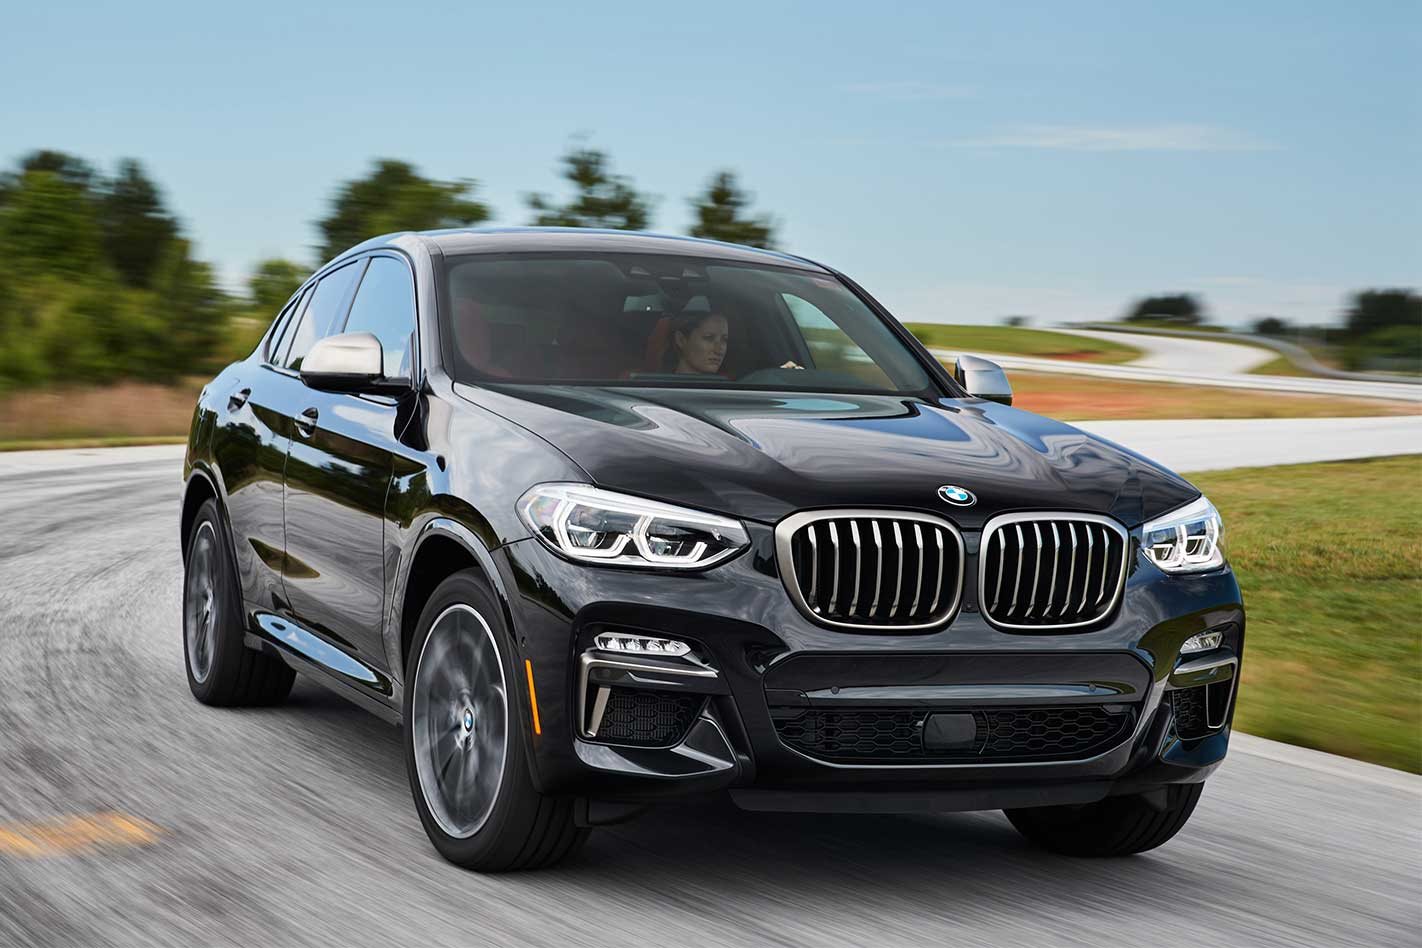 2018 BMW X4 M40i quick performance review